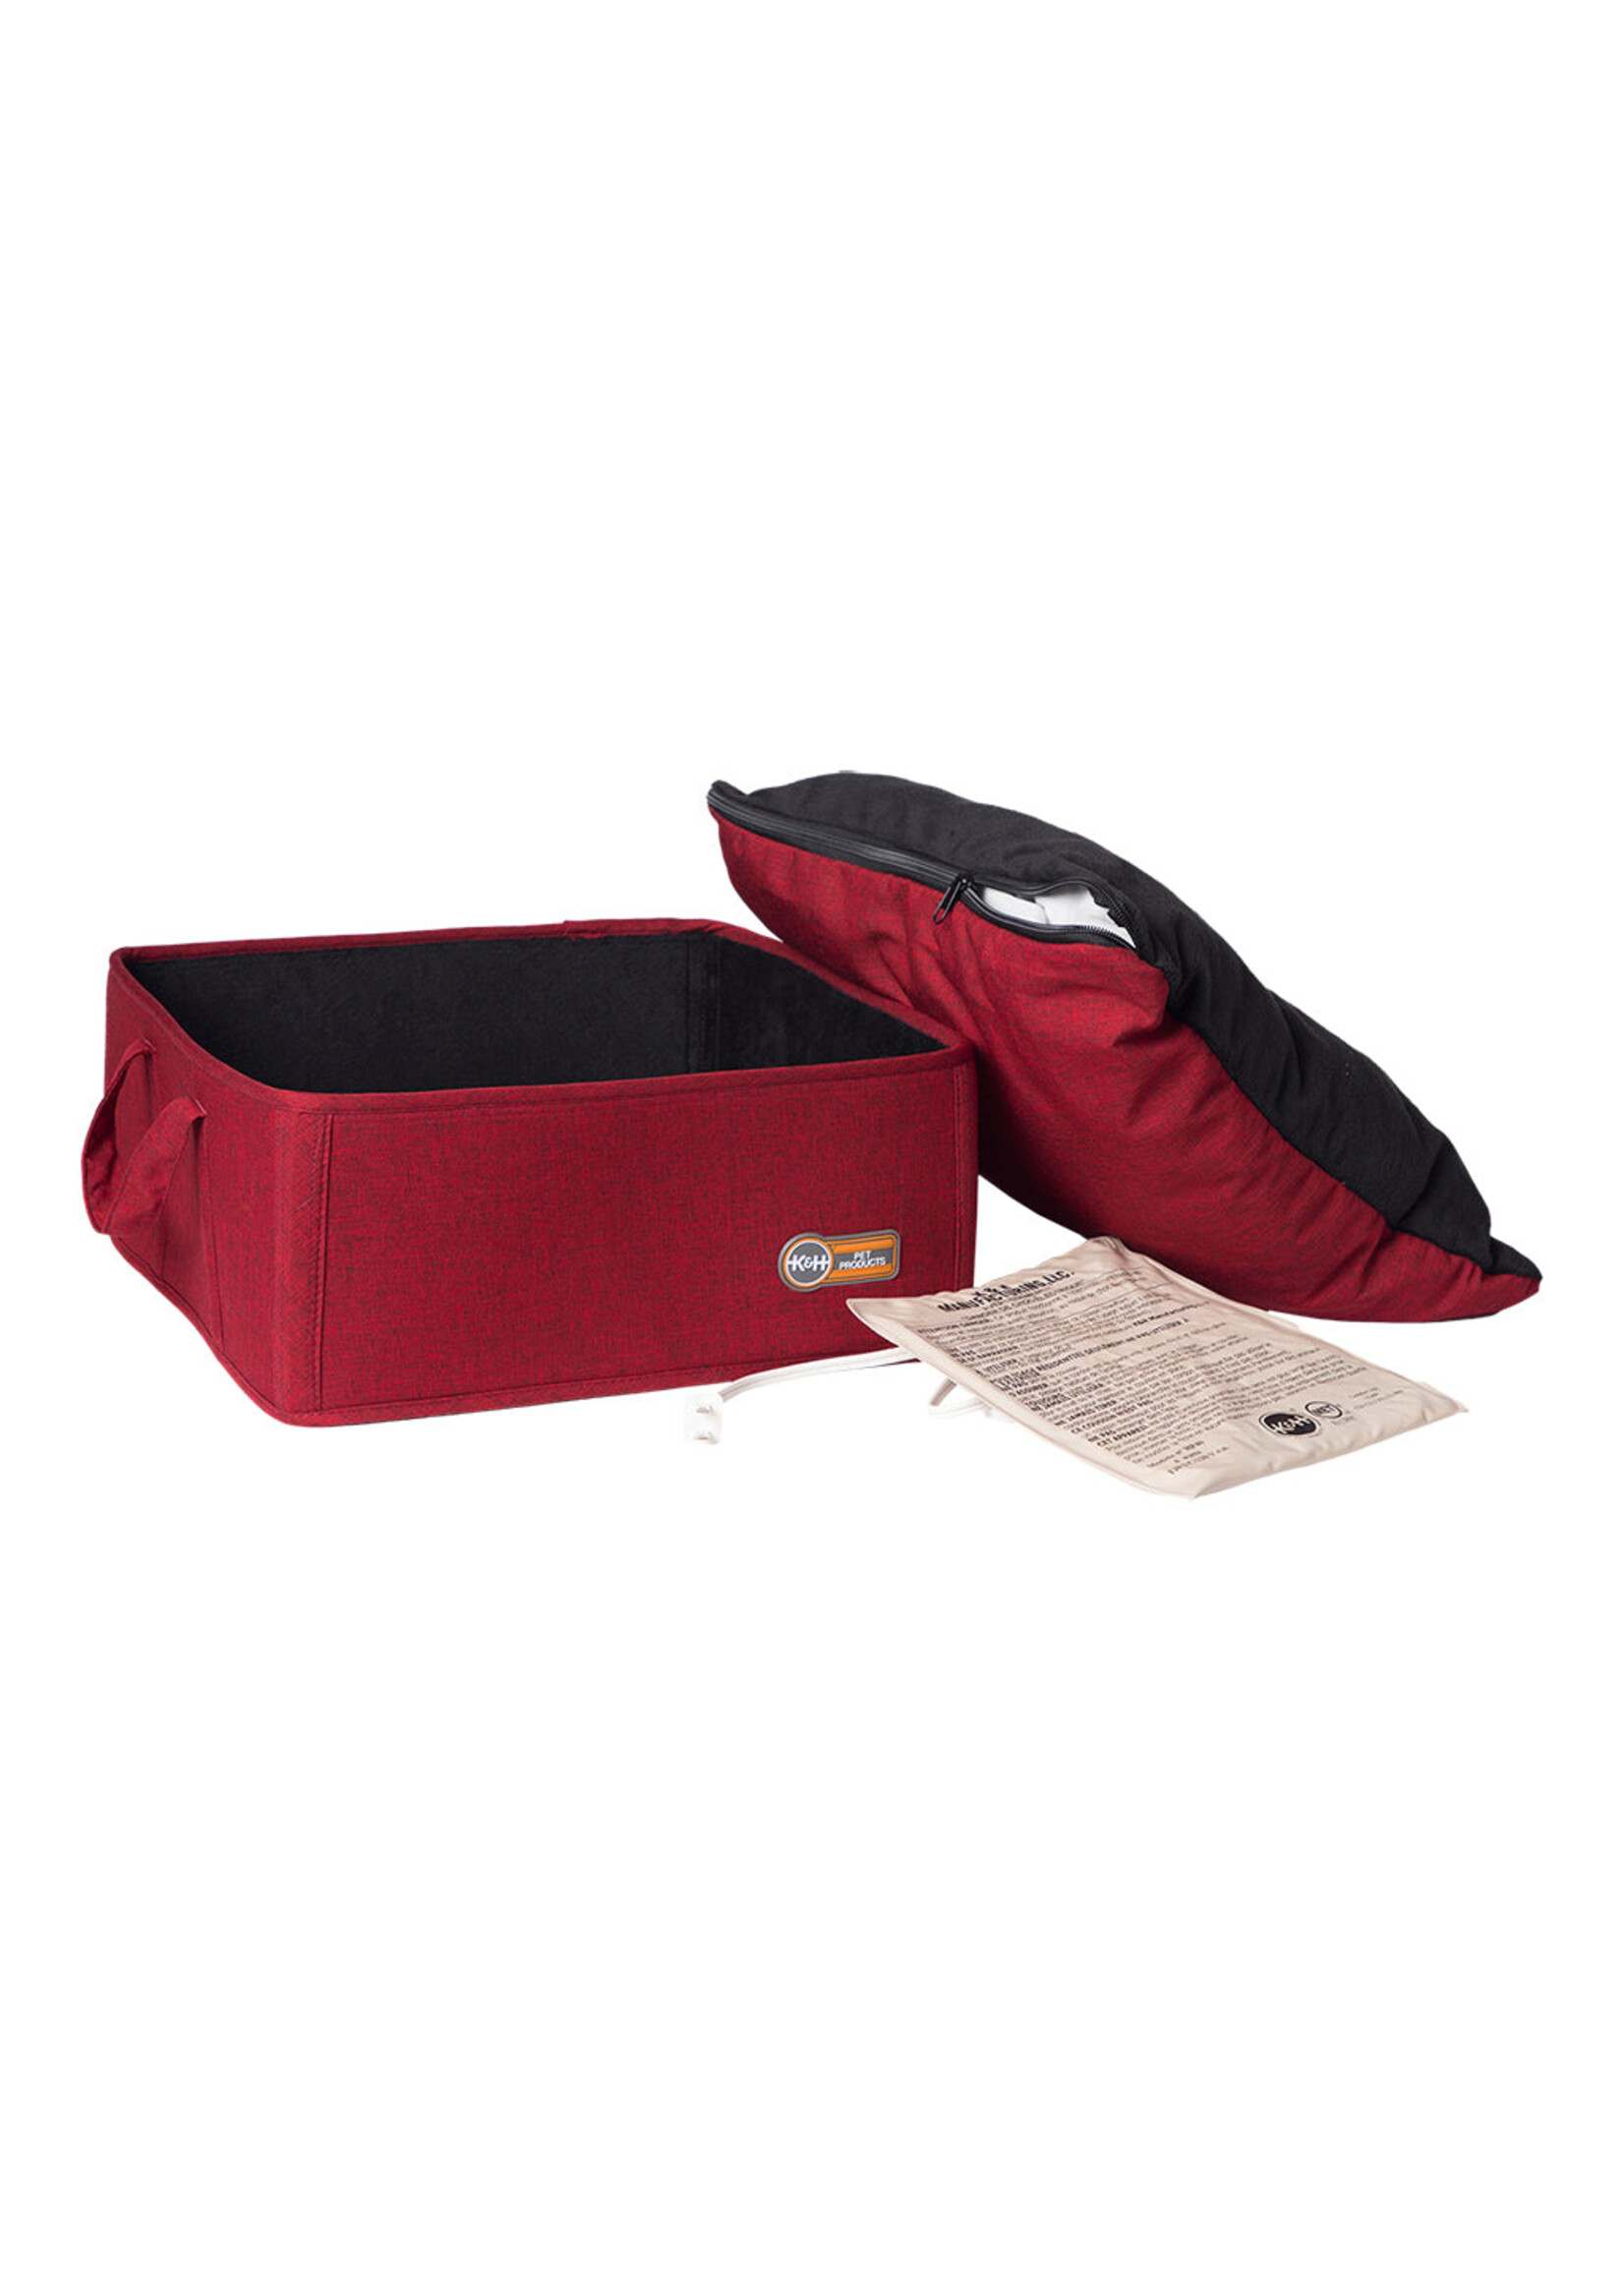 K&H Pet Products K&H Thermo Basket Bed 15 x 15in 4watt